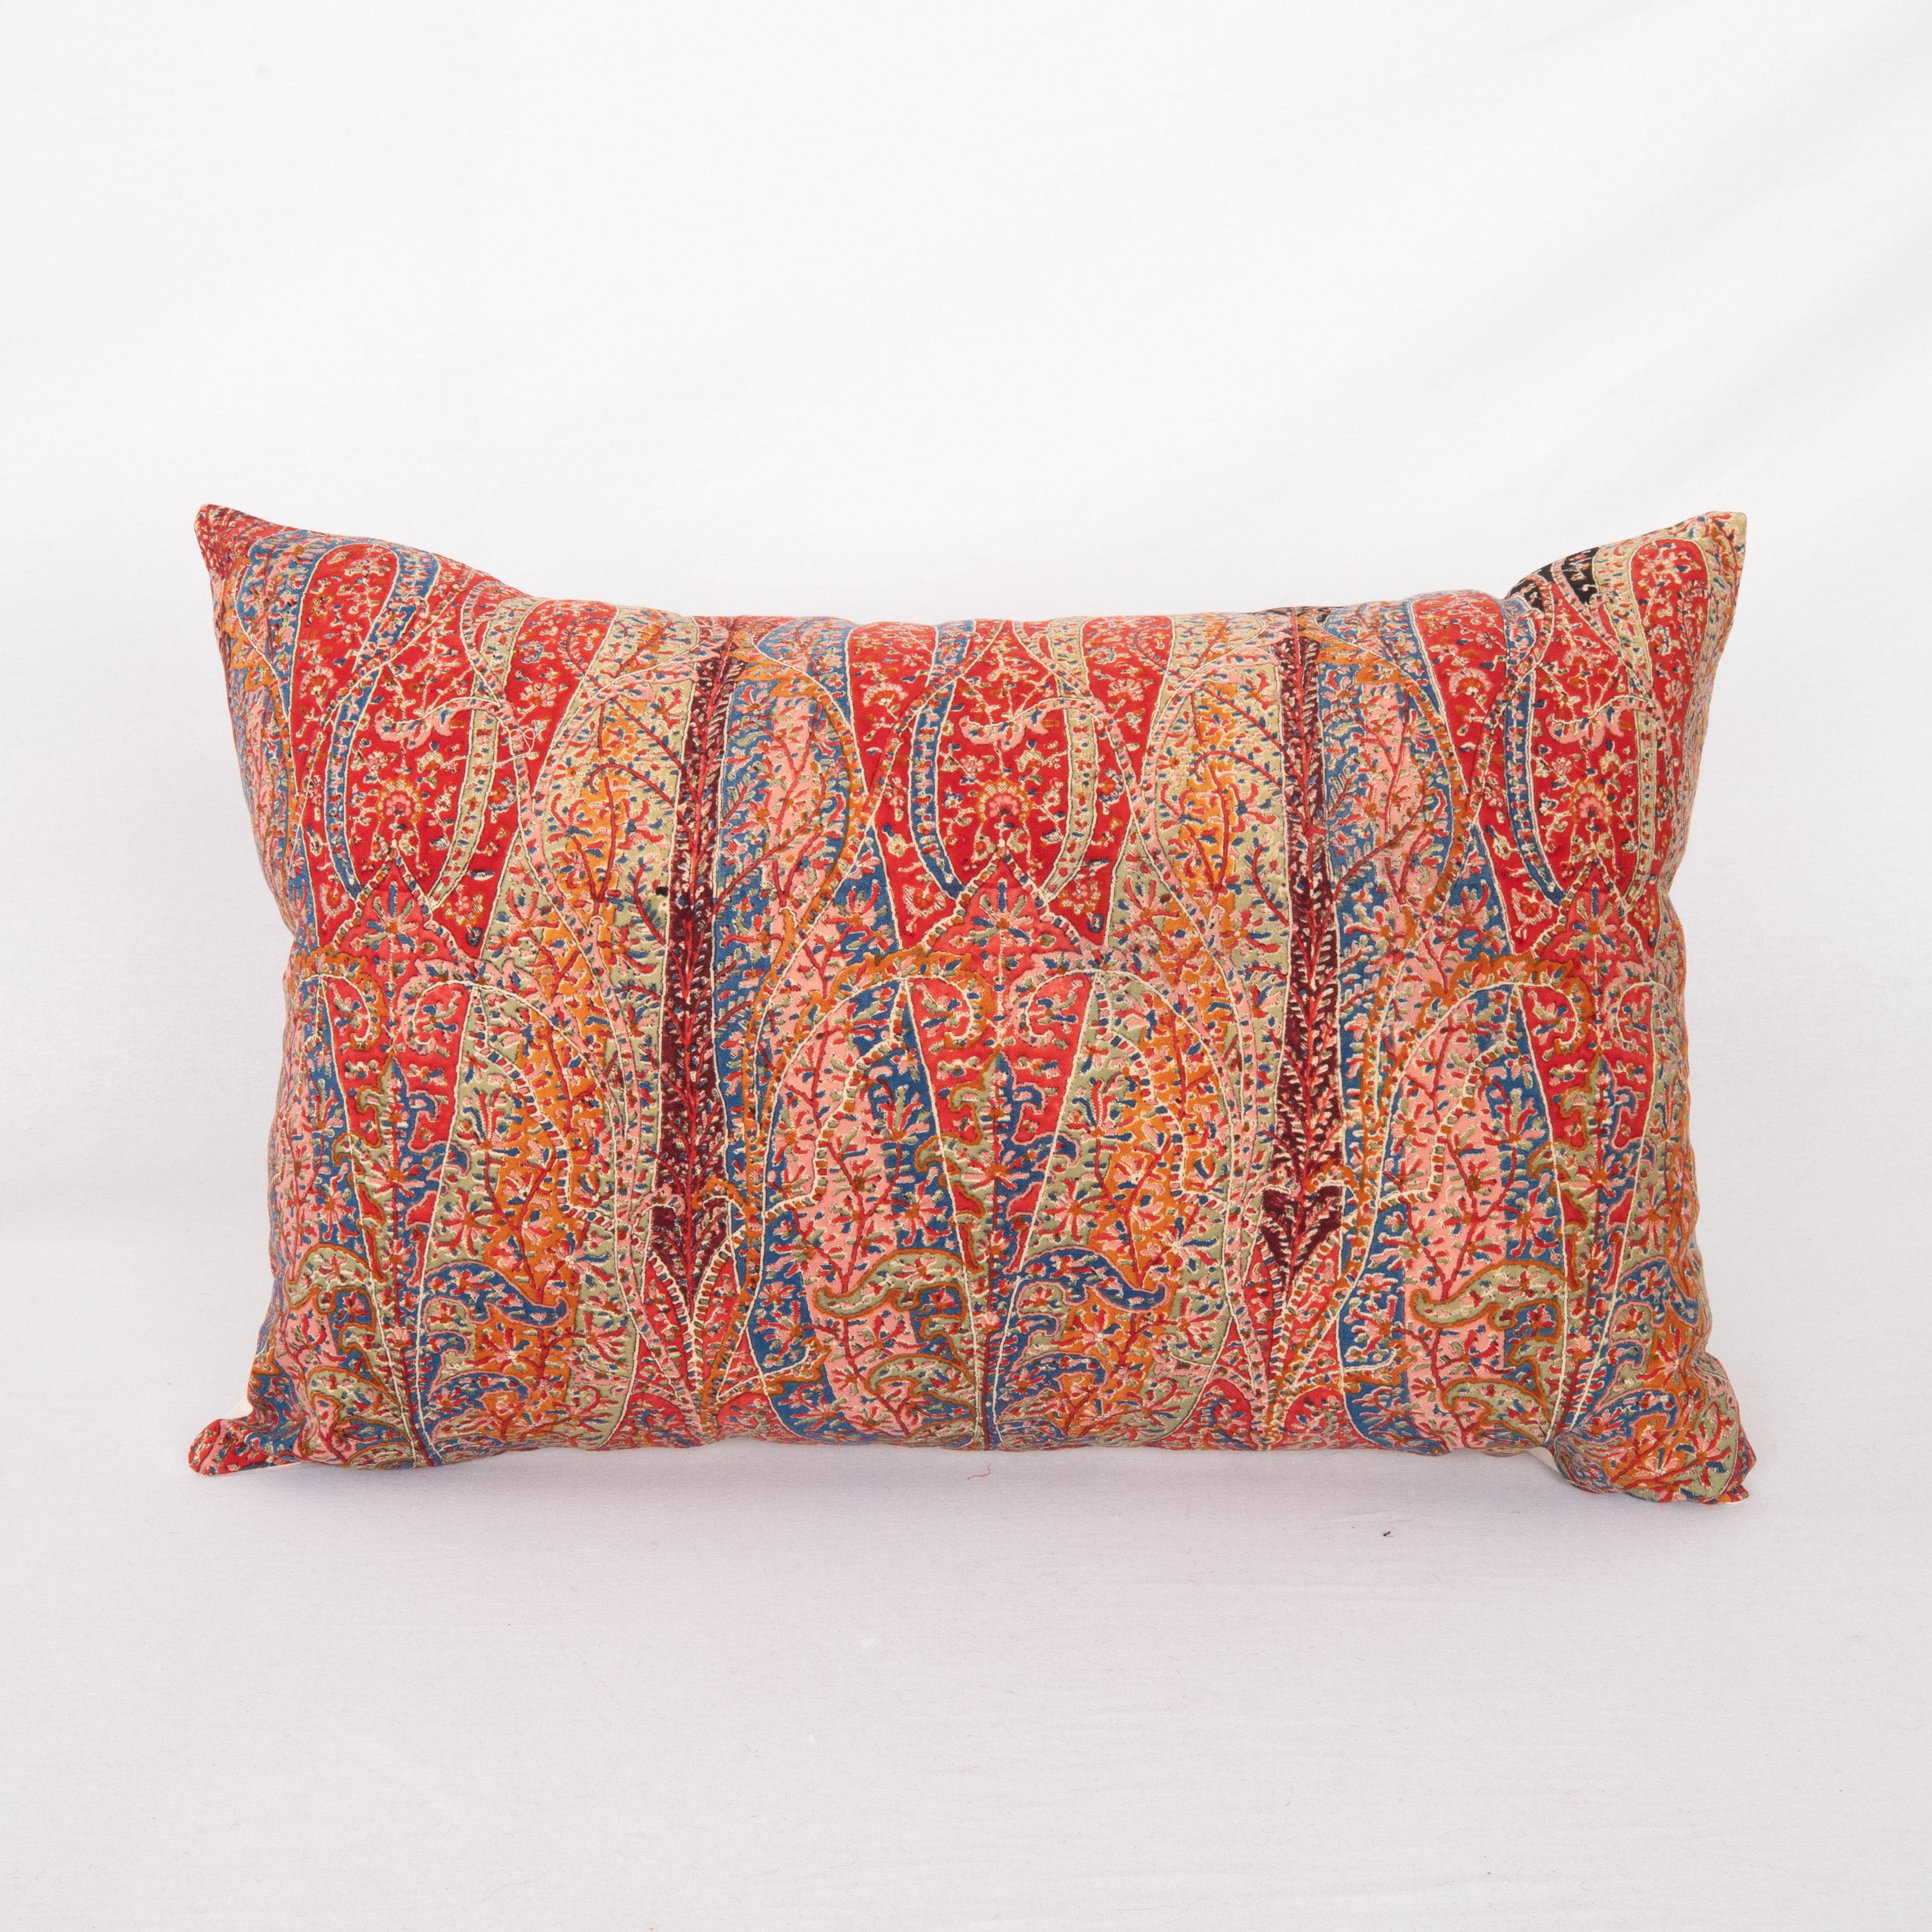 Pillow Cover Made from a an Antique Printed Scottish Paisley Shawl


It does not come with an insert but a bag made from cotton fabric to accommodate insert materials.
Linen in the back.
Zipper closure.
Dry Cleaning reccommeded.
